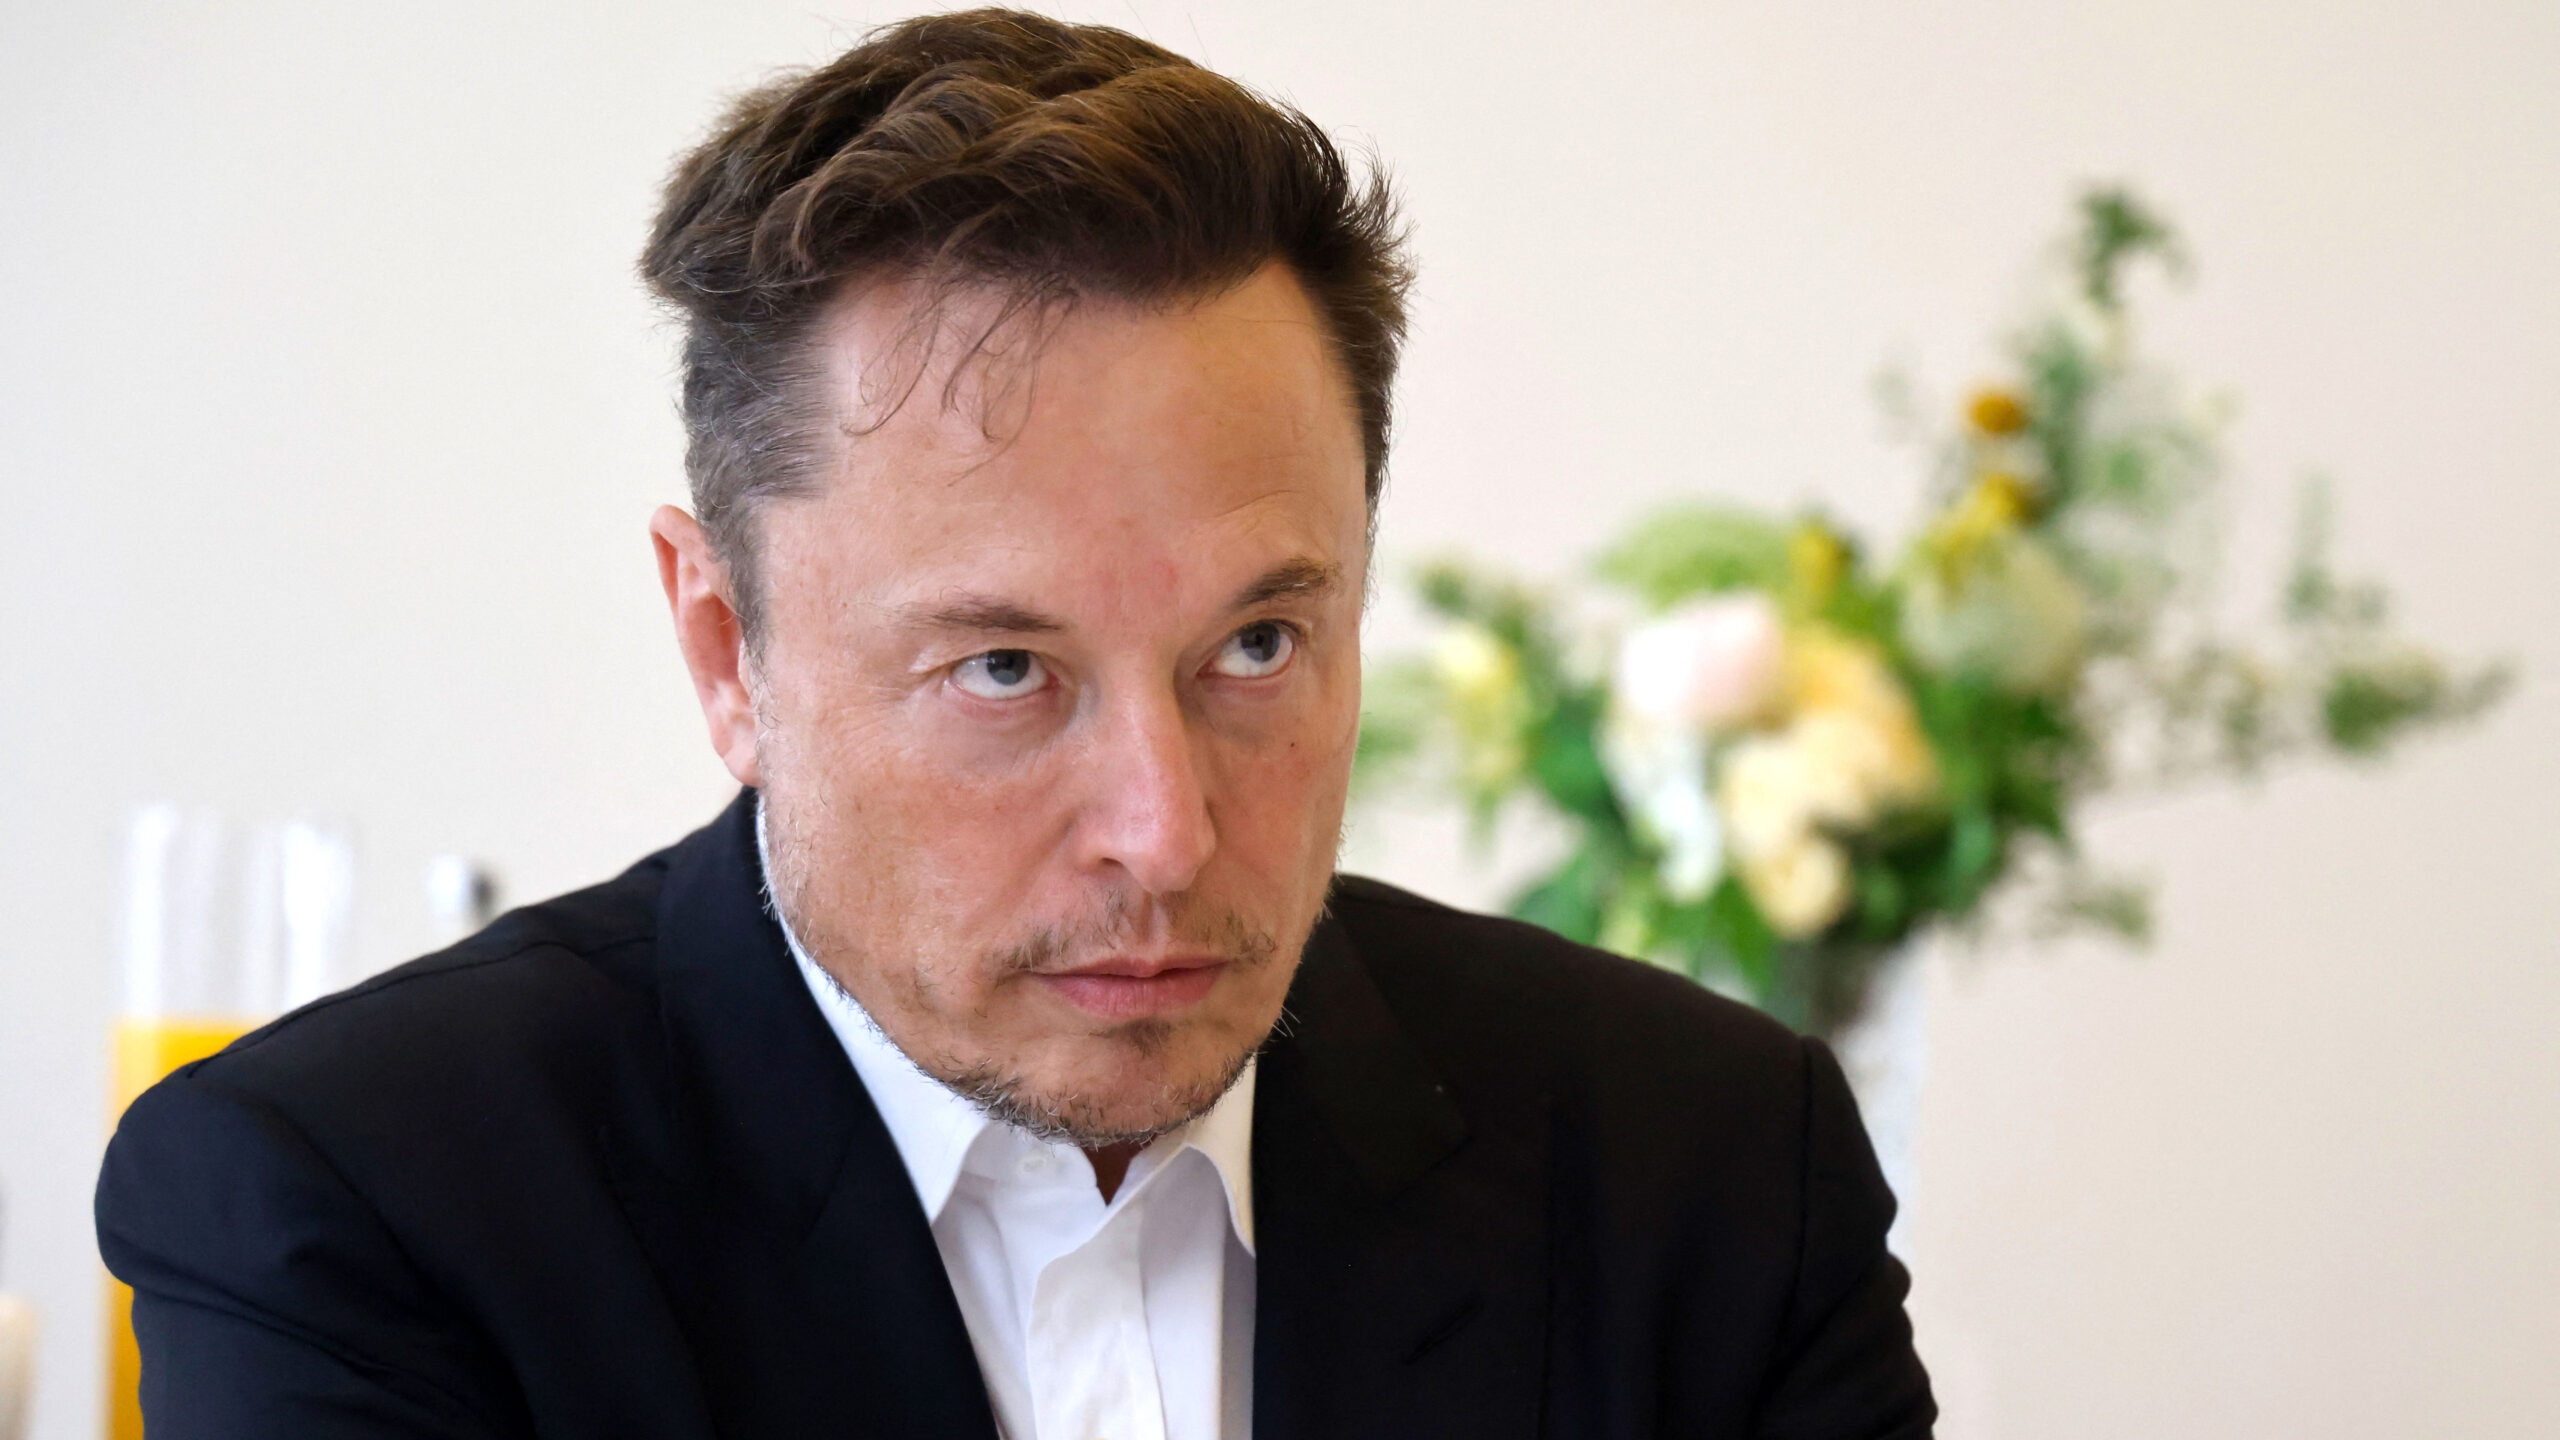 Musk slams ‘work from home’ mentality: ‘Stop being self-righteous’